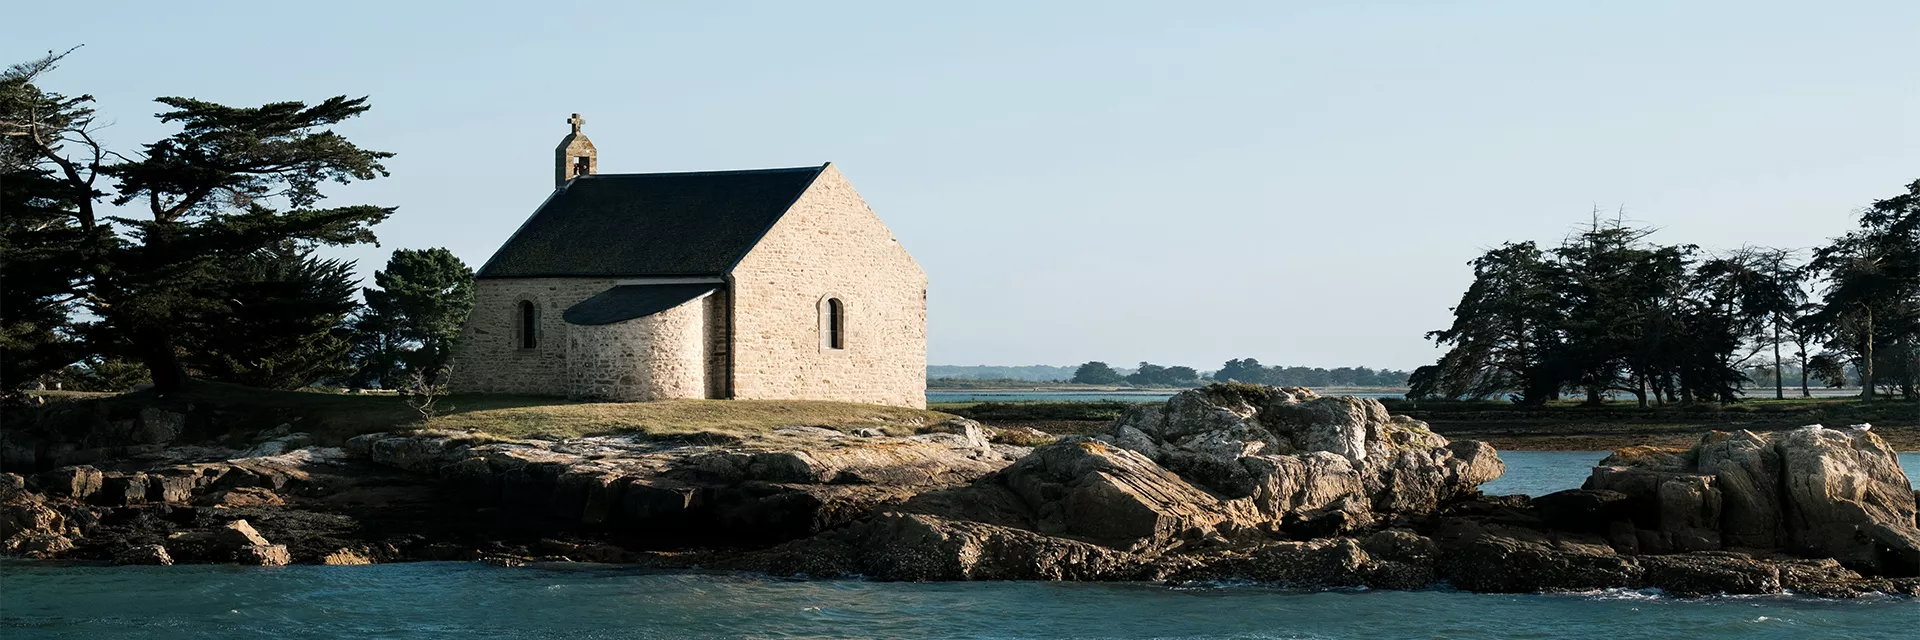 Where to go for a weekend in Brittany?